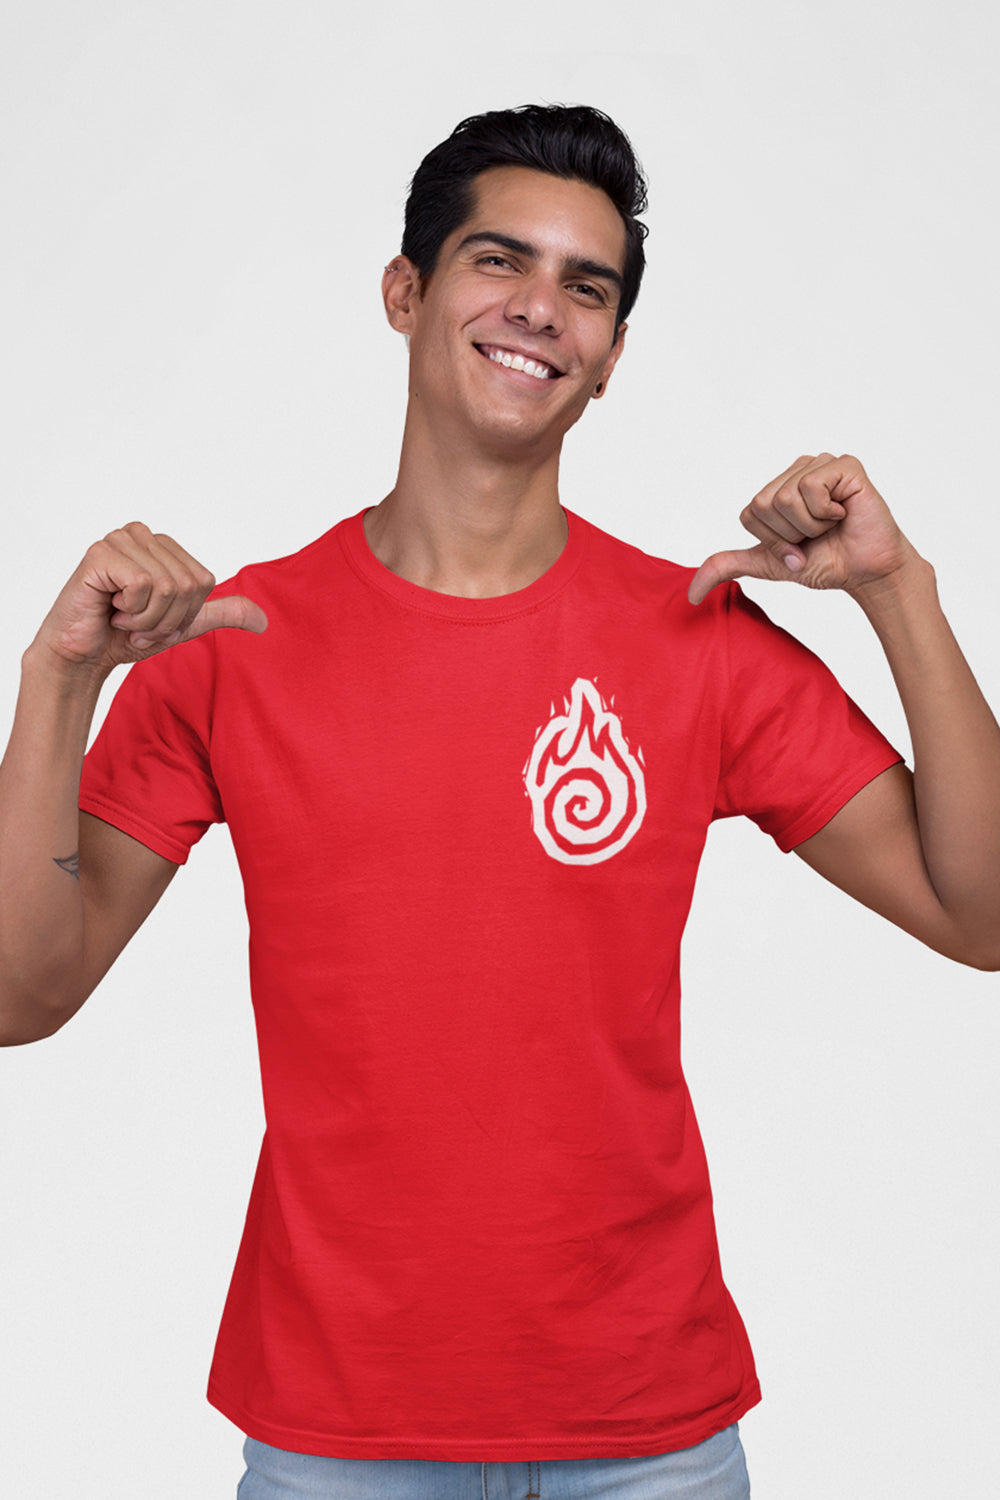 Flame Graphic Printed Red Tshirt